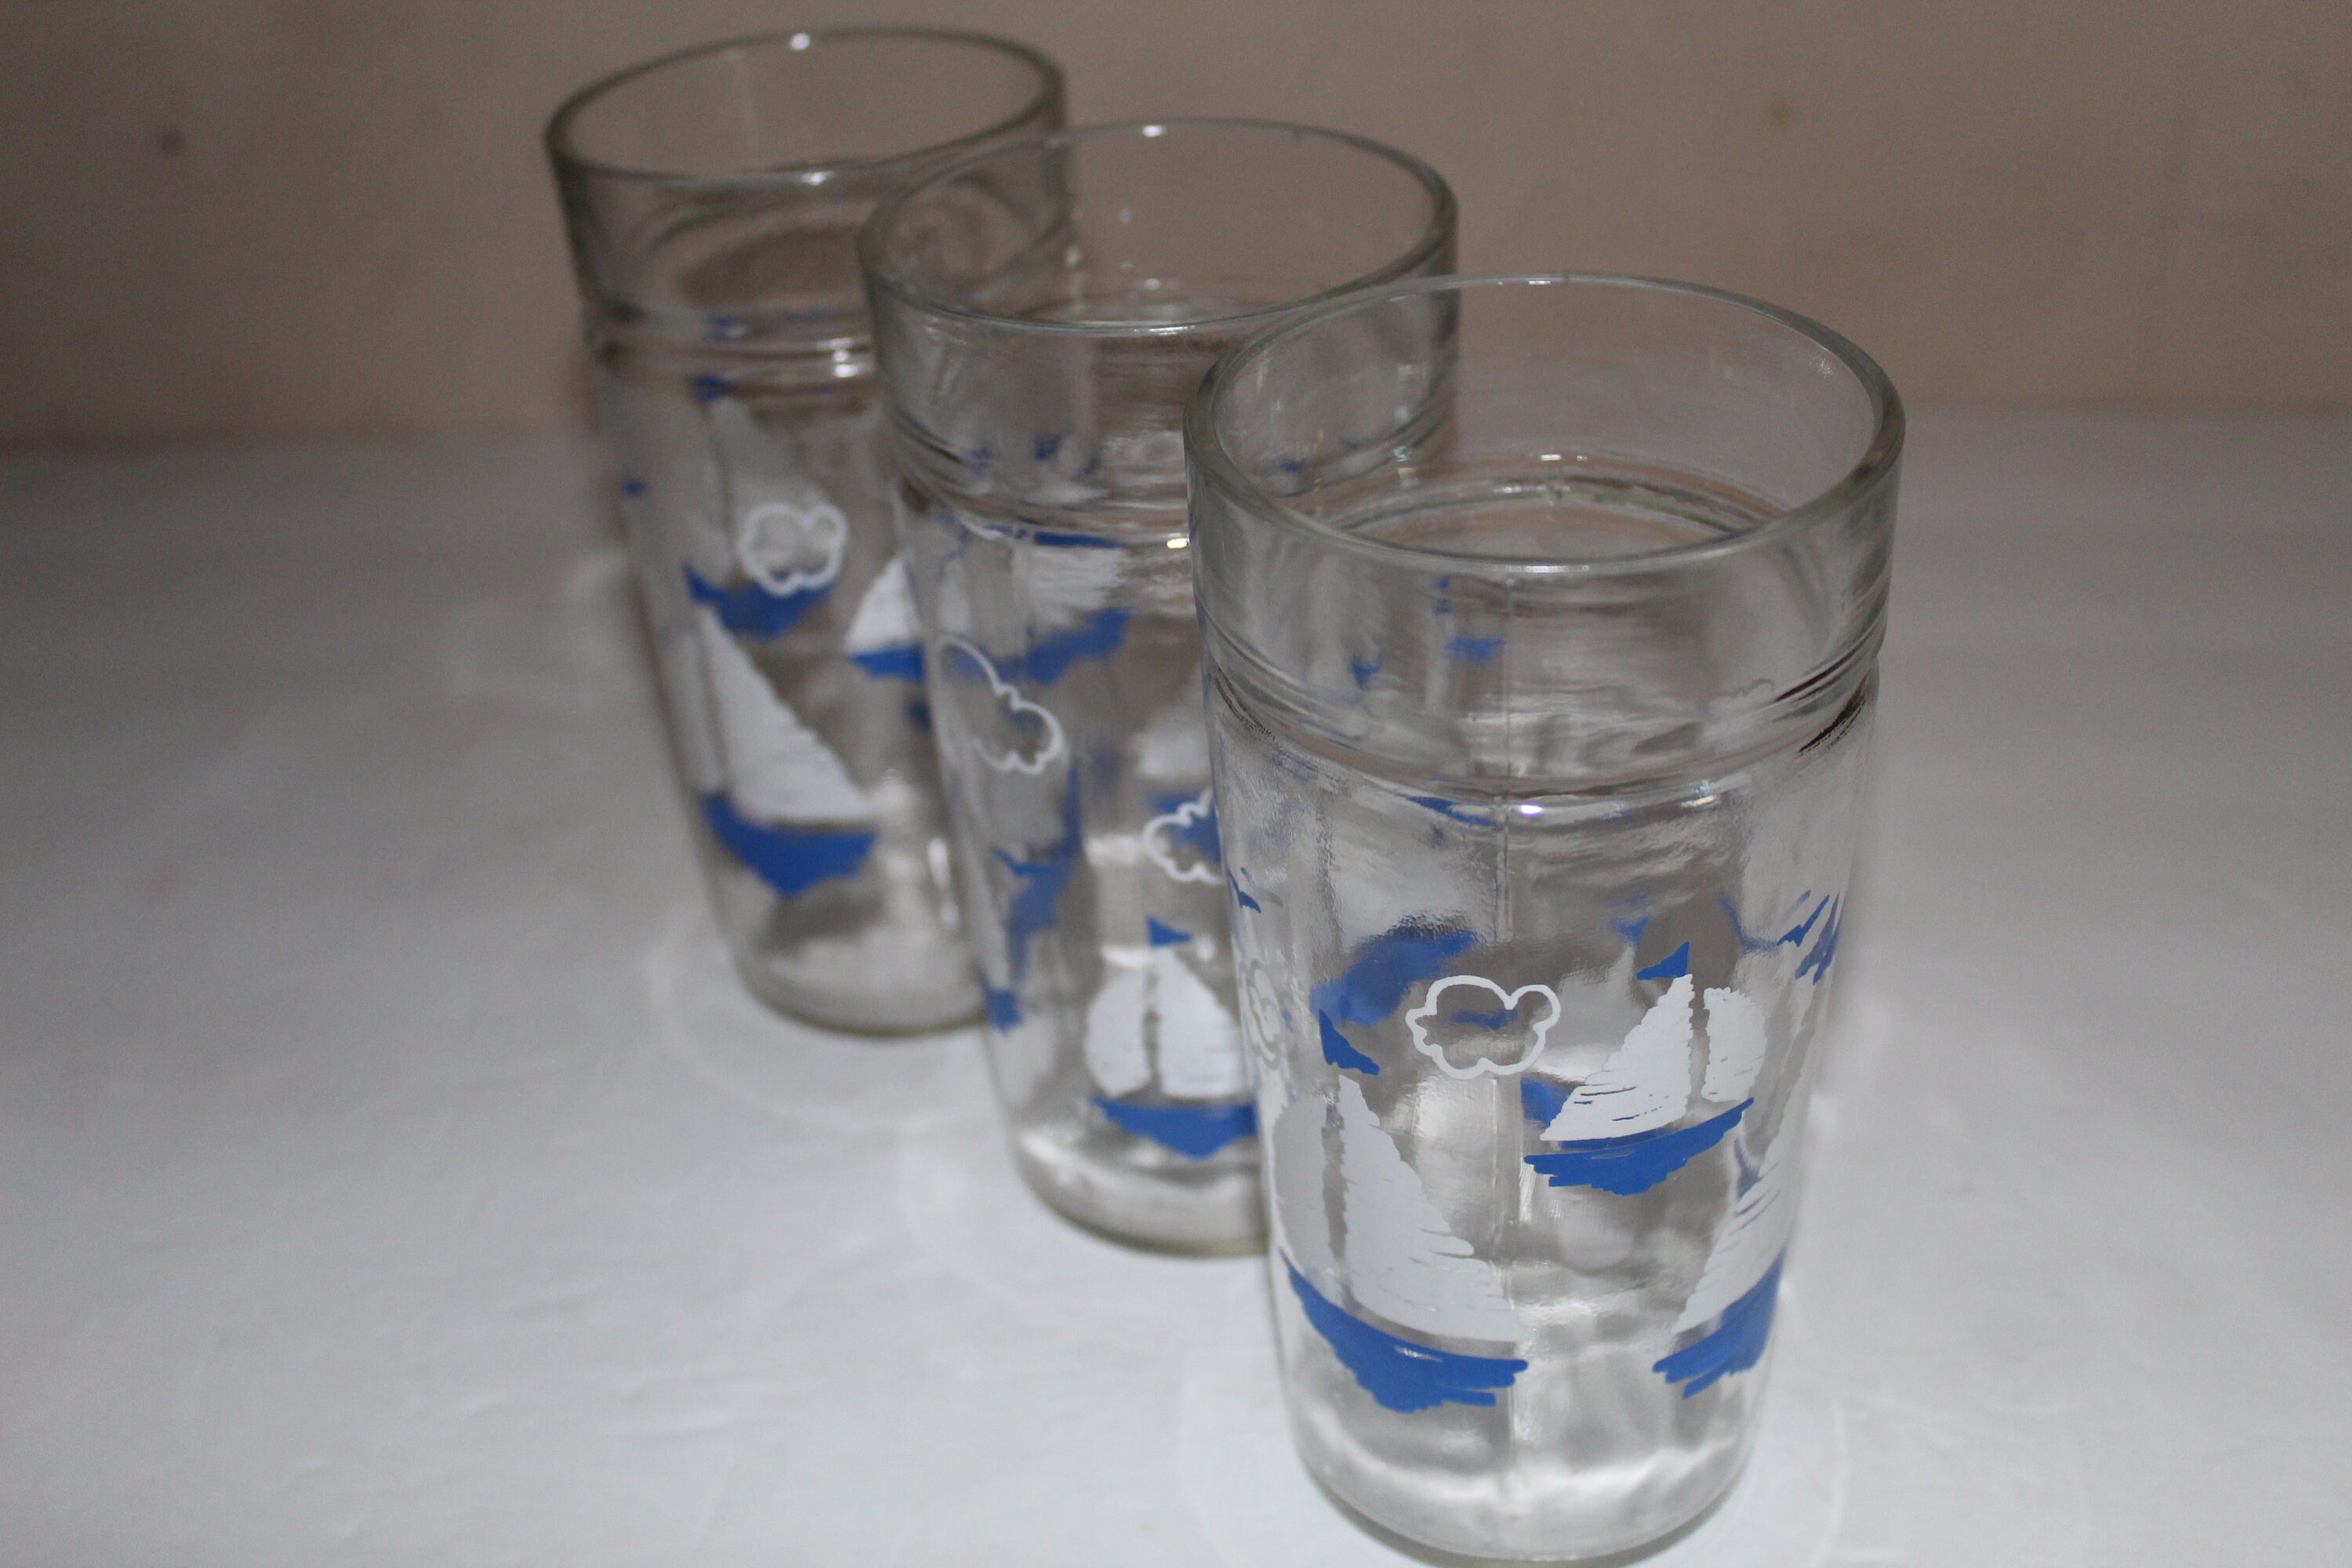 Vintage Retro Boho Mid Century MCM 1960s Barware Bar Ware Sailboat and  Seagulls Etched Drinking Glasses Made in Romania 10 Available 